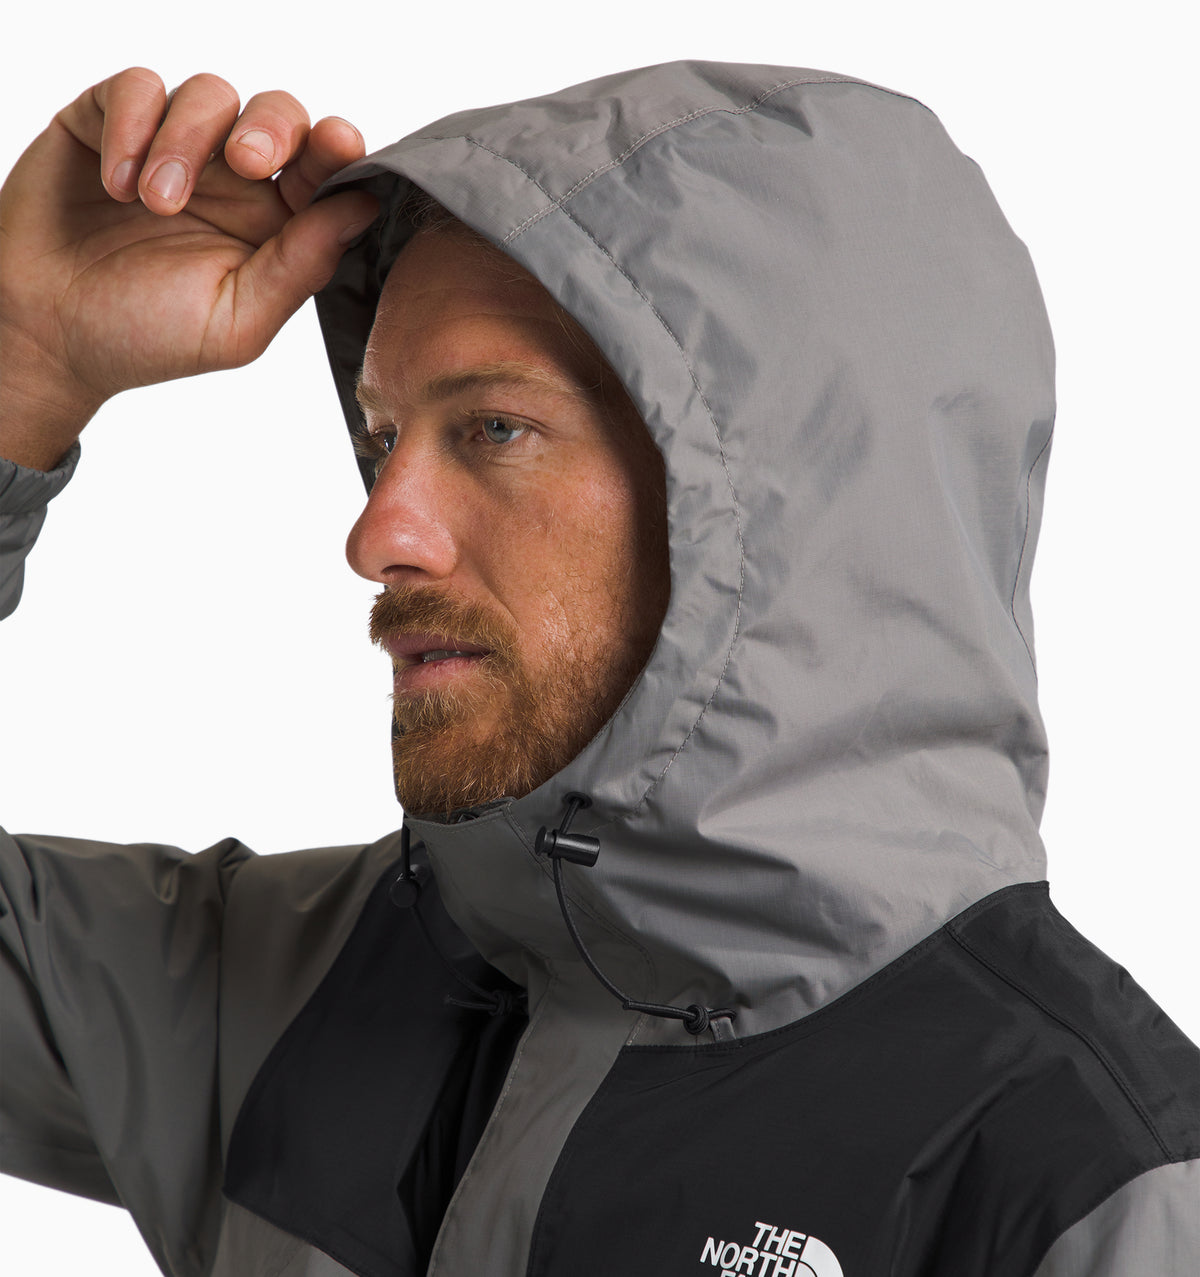 The North Face Men's Antora Jacket - Smoked Pearl